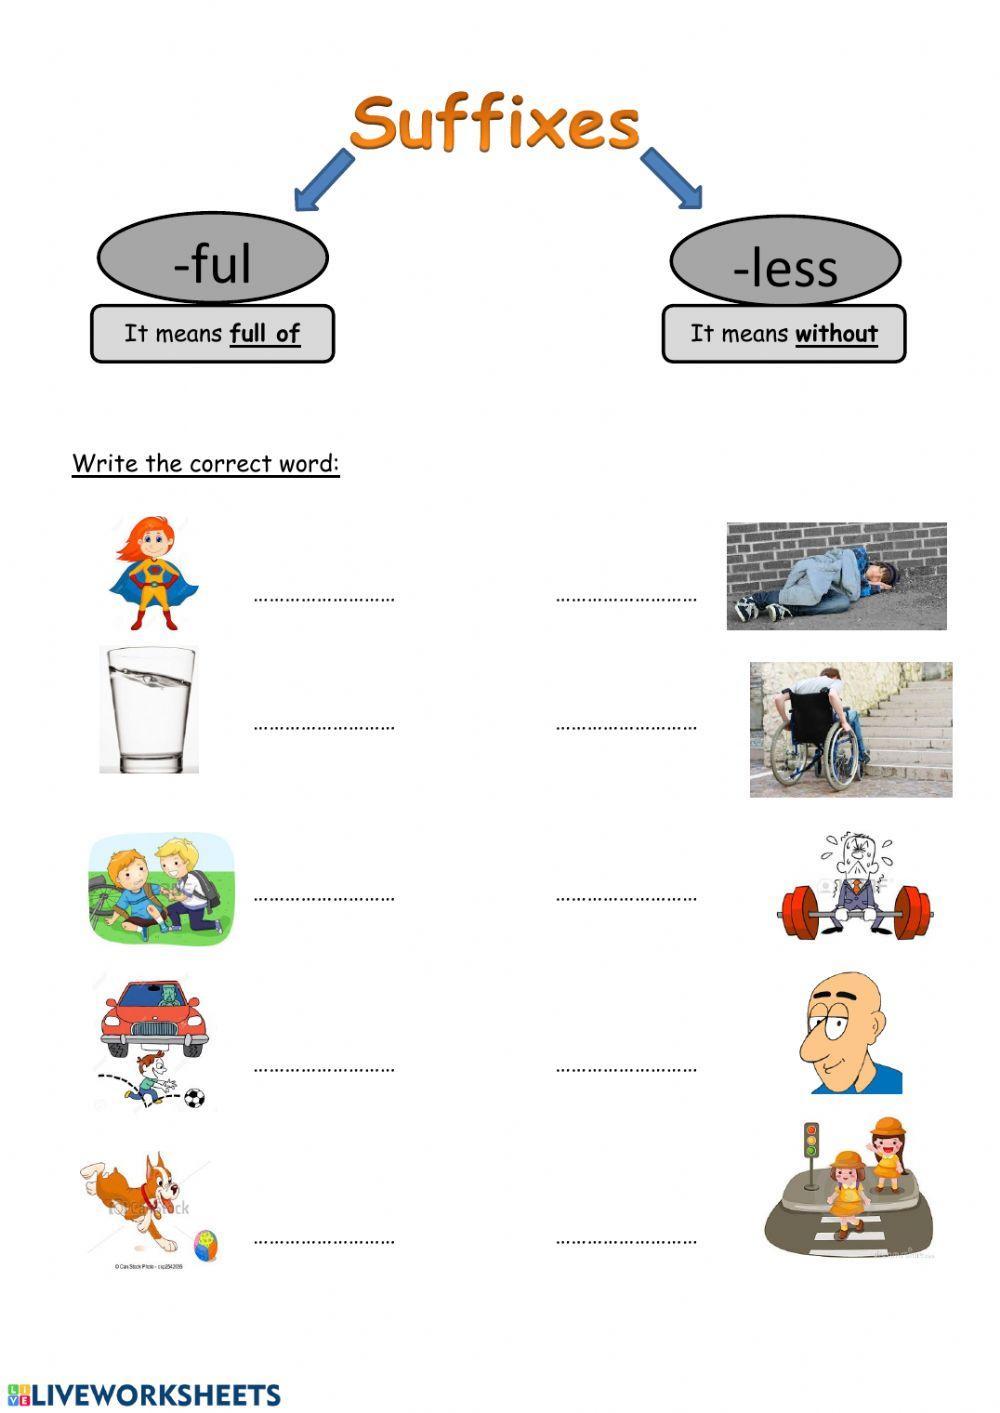 suffixes ful less 6A